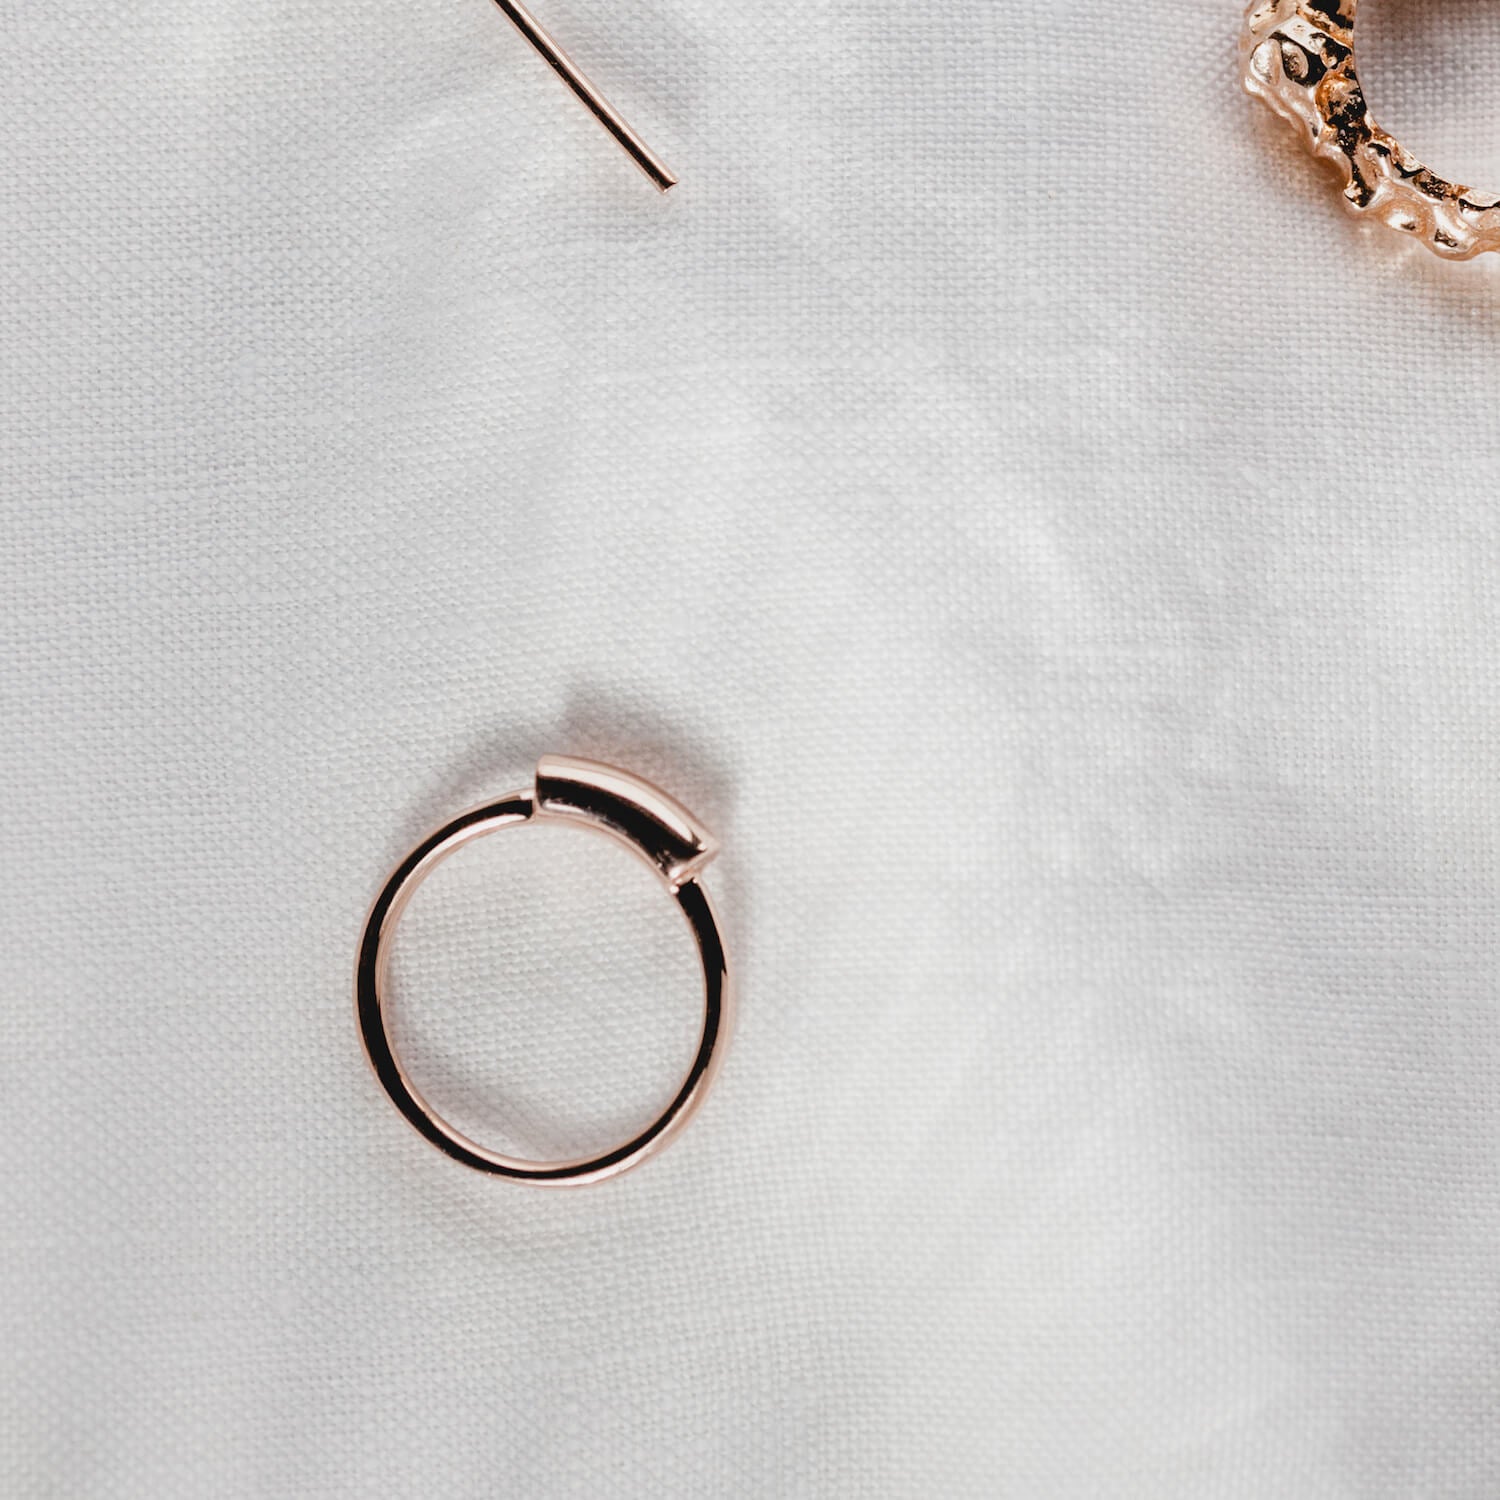 A rose gold ring with a thick wire signet style detail